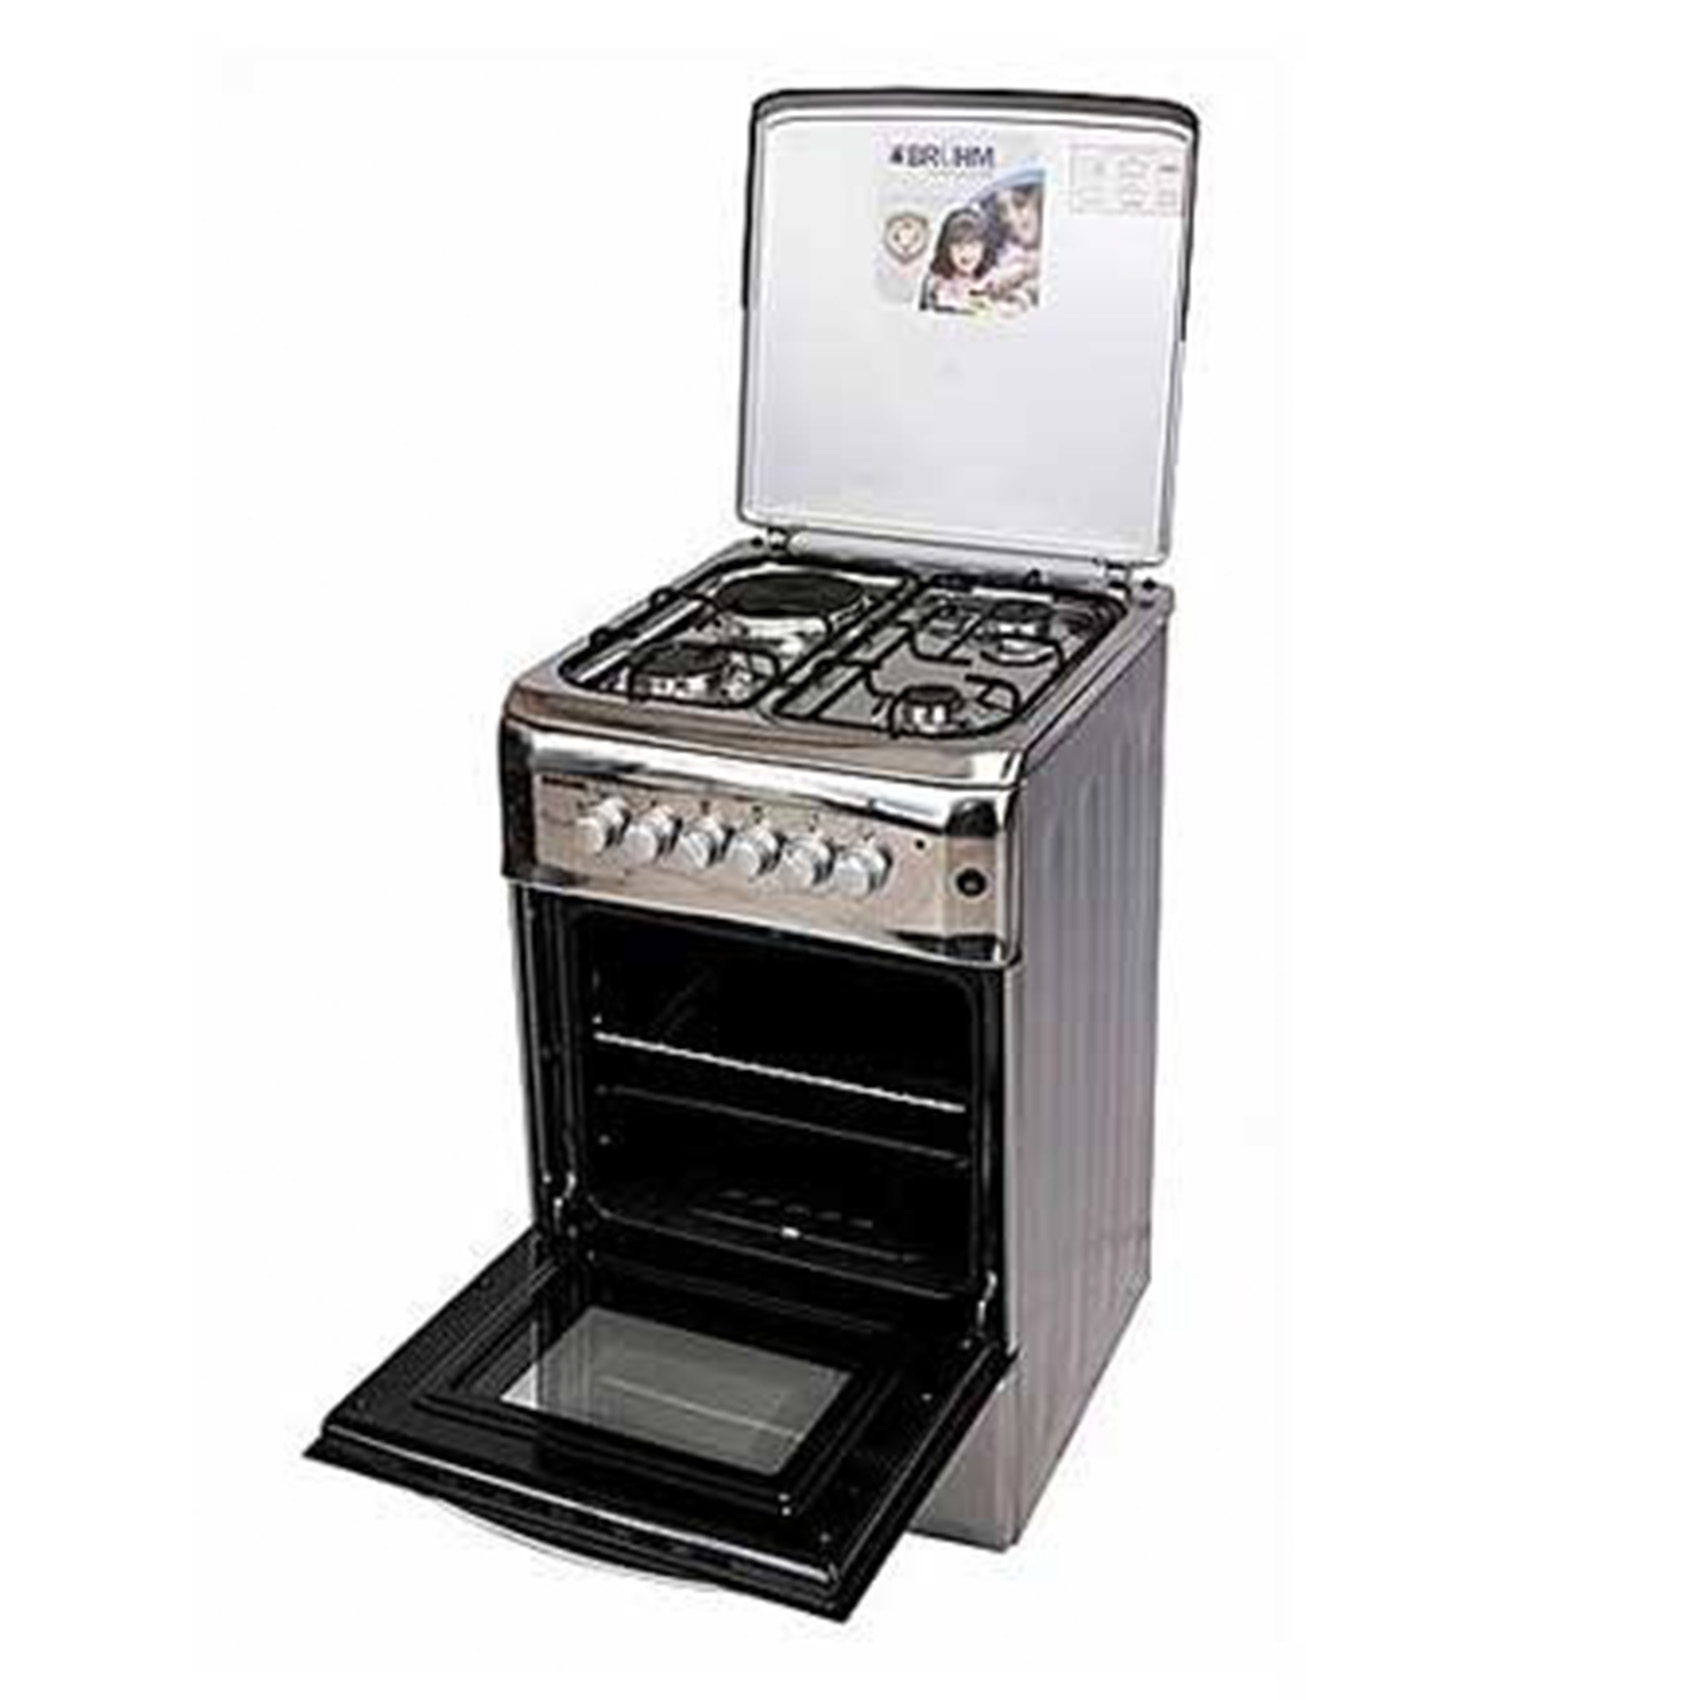 Bruhm 3 Gas + 1 Silver Color,Electric Oven &amp; Grill,Glass Top 50X55 - BGC 5531IS